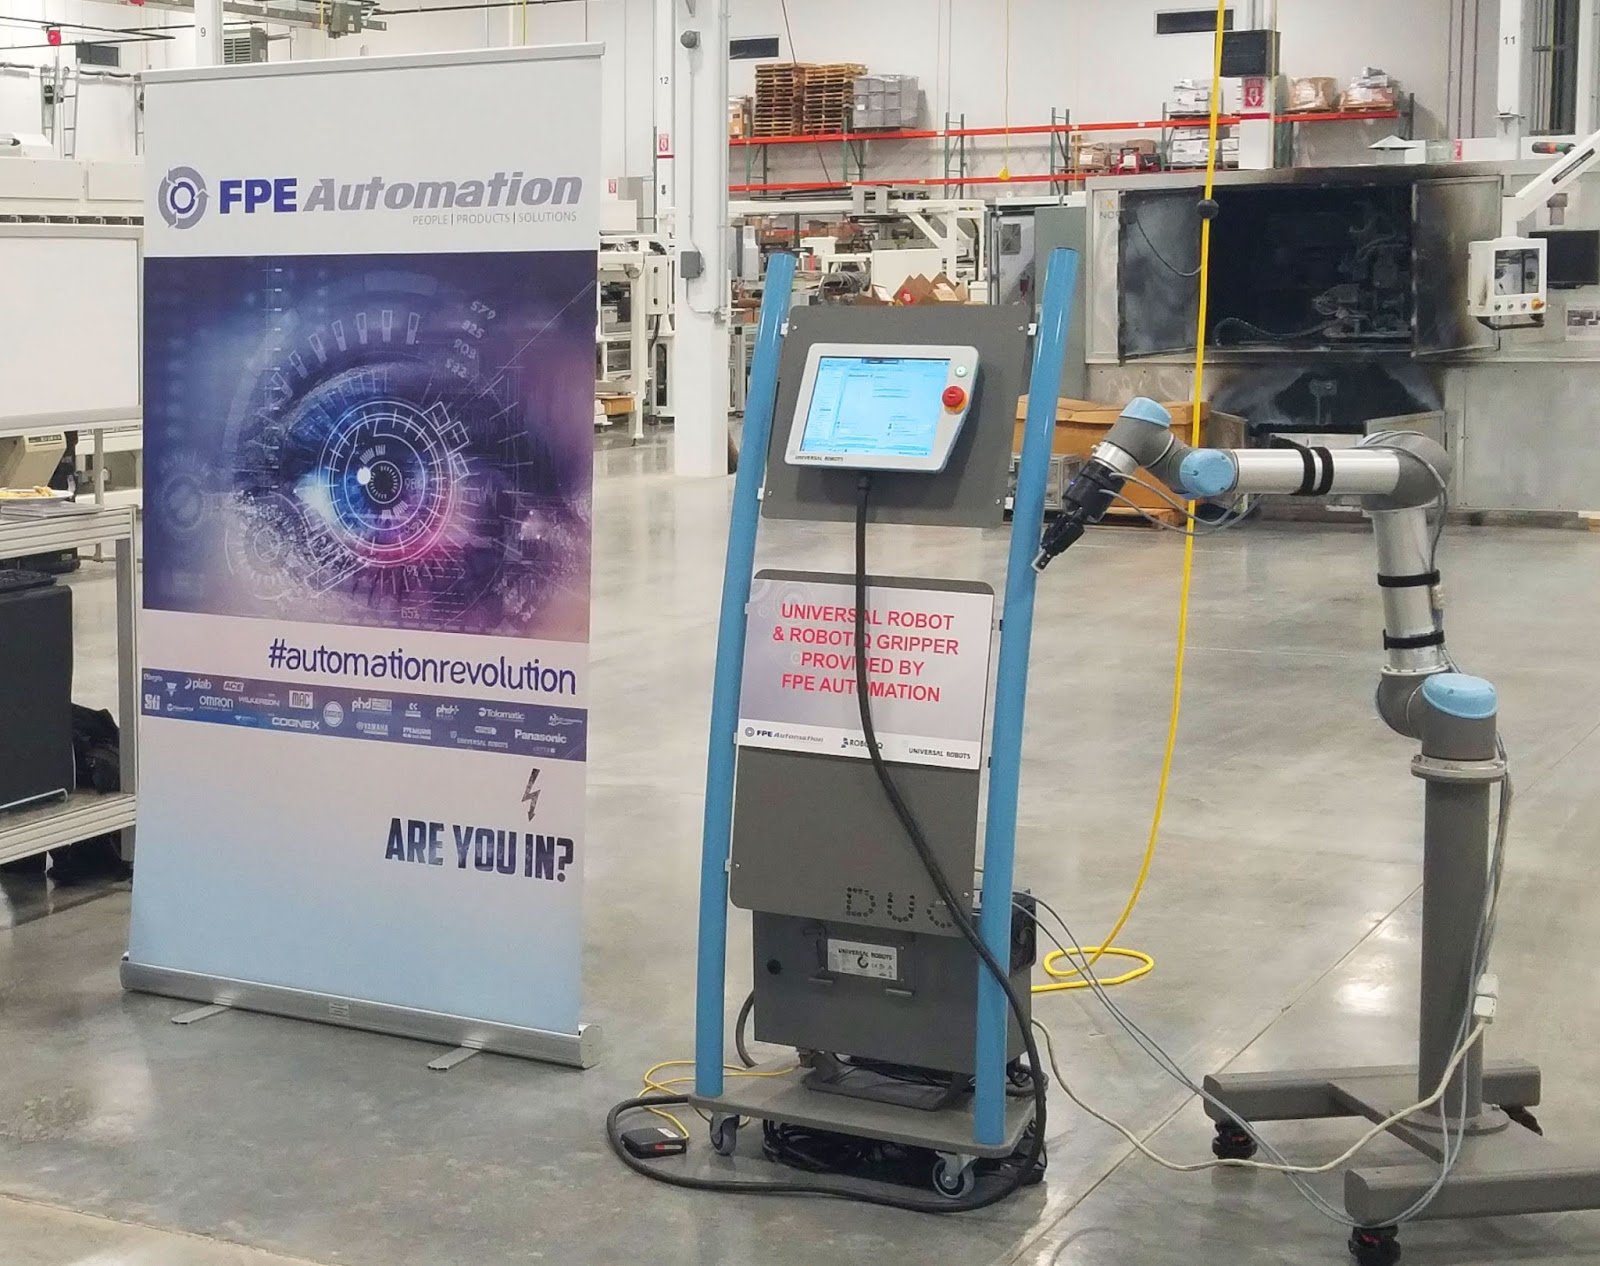 FPE Automation, Inc.: Laser Marking and Collaborative Robots on Tour